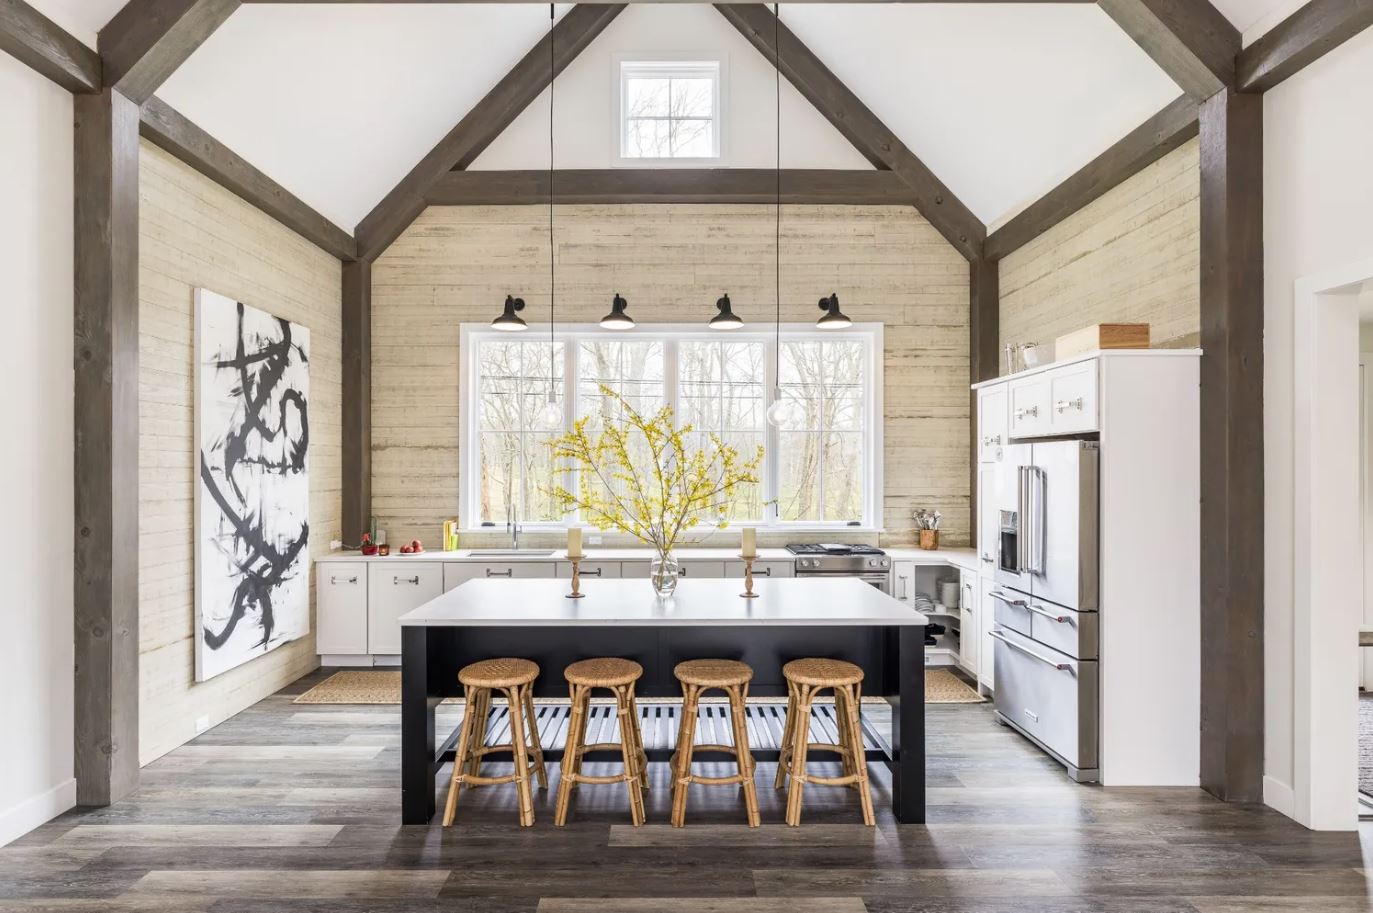 Moody Kitchen with white shaker cabinets and a custom black furniture island with exposed wood beams and giant windows.